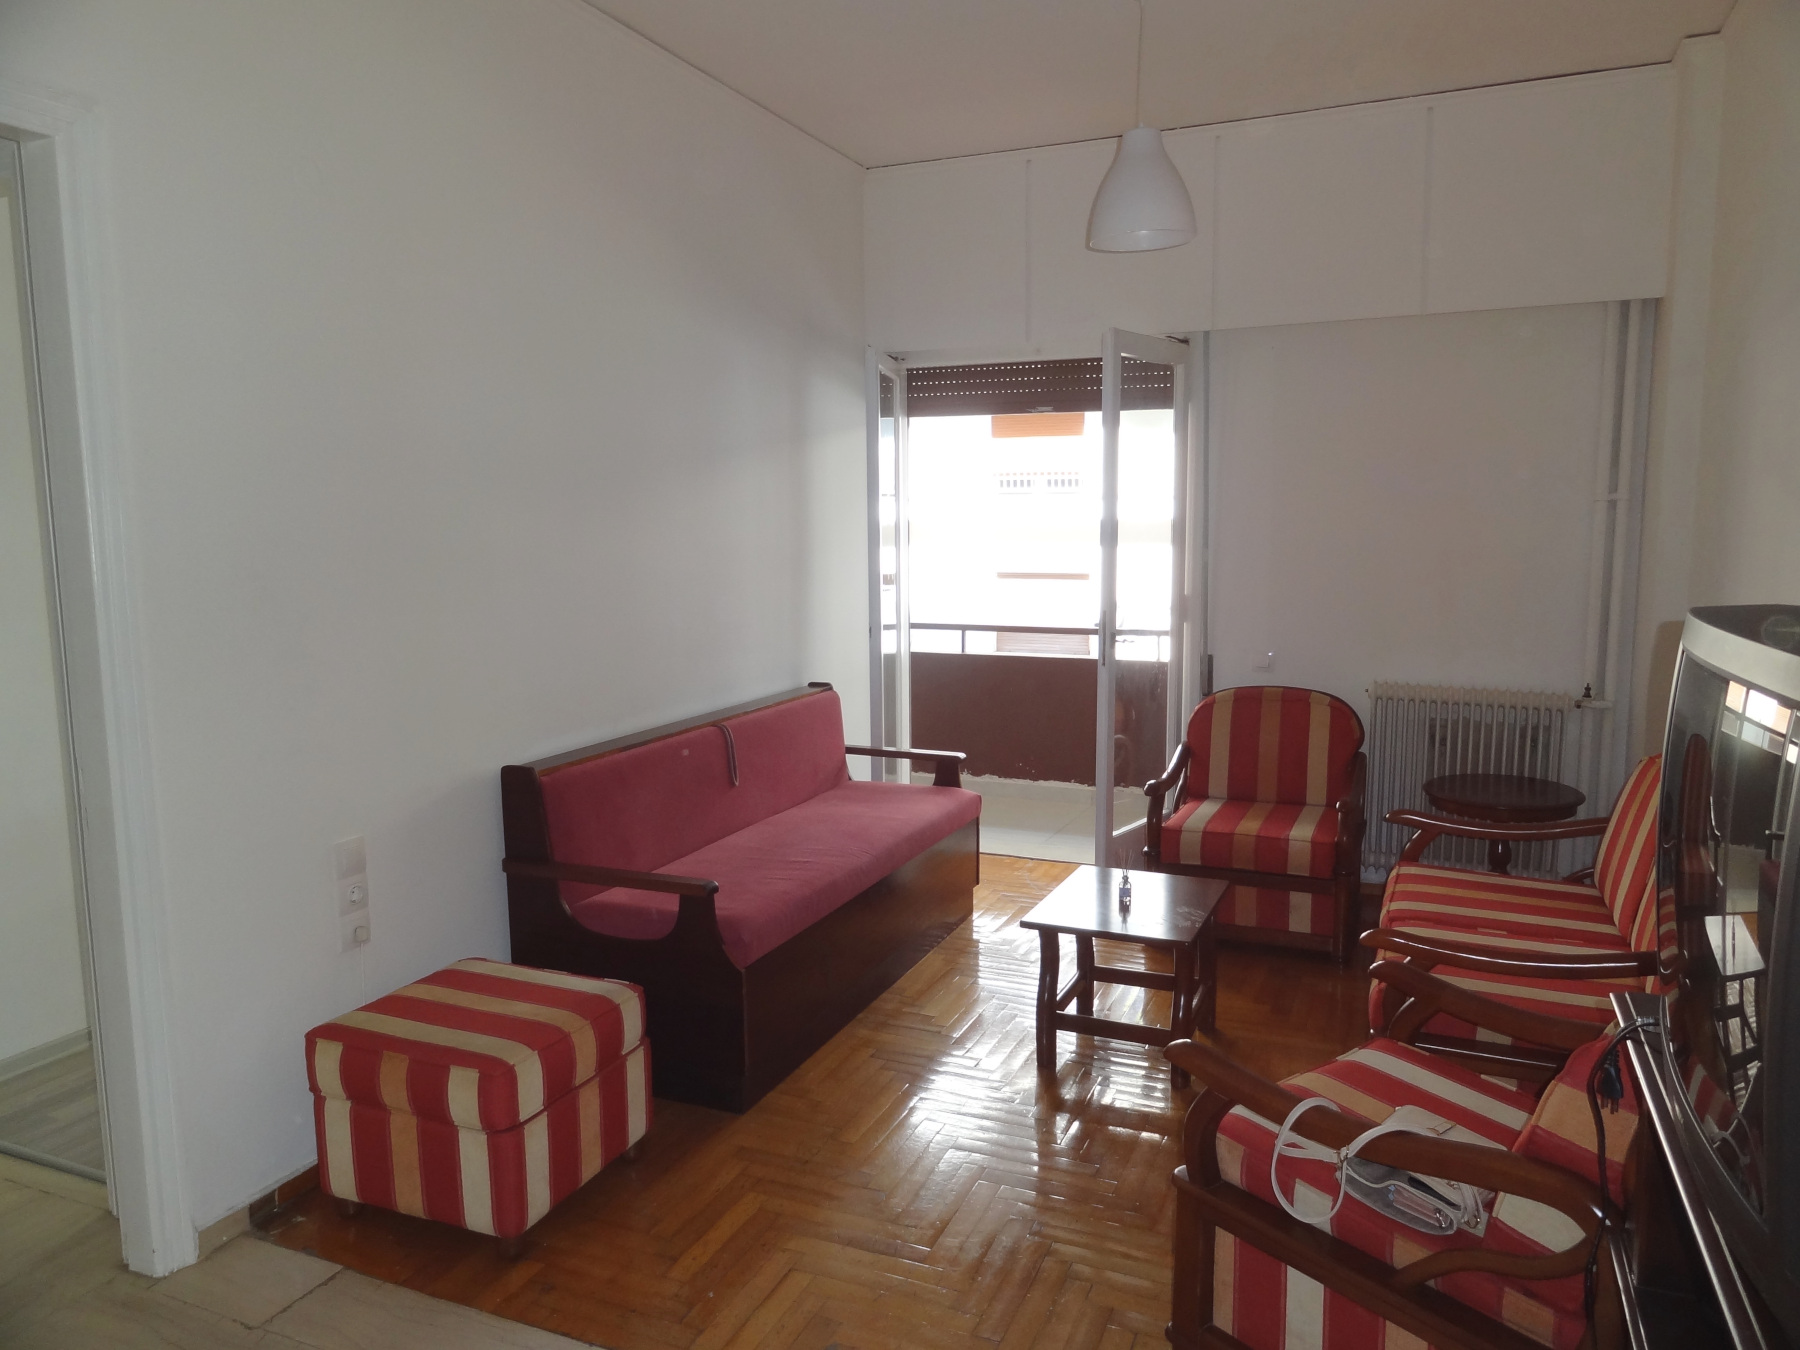 1 bedroom apartment for rent, 55 sq.m. 1st floor near Dodoni Avenue in the center of Ioannina